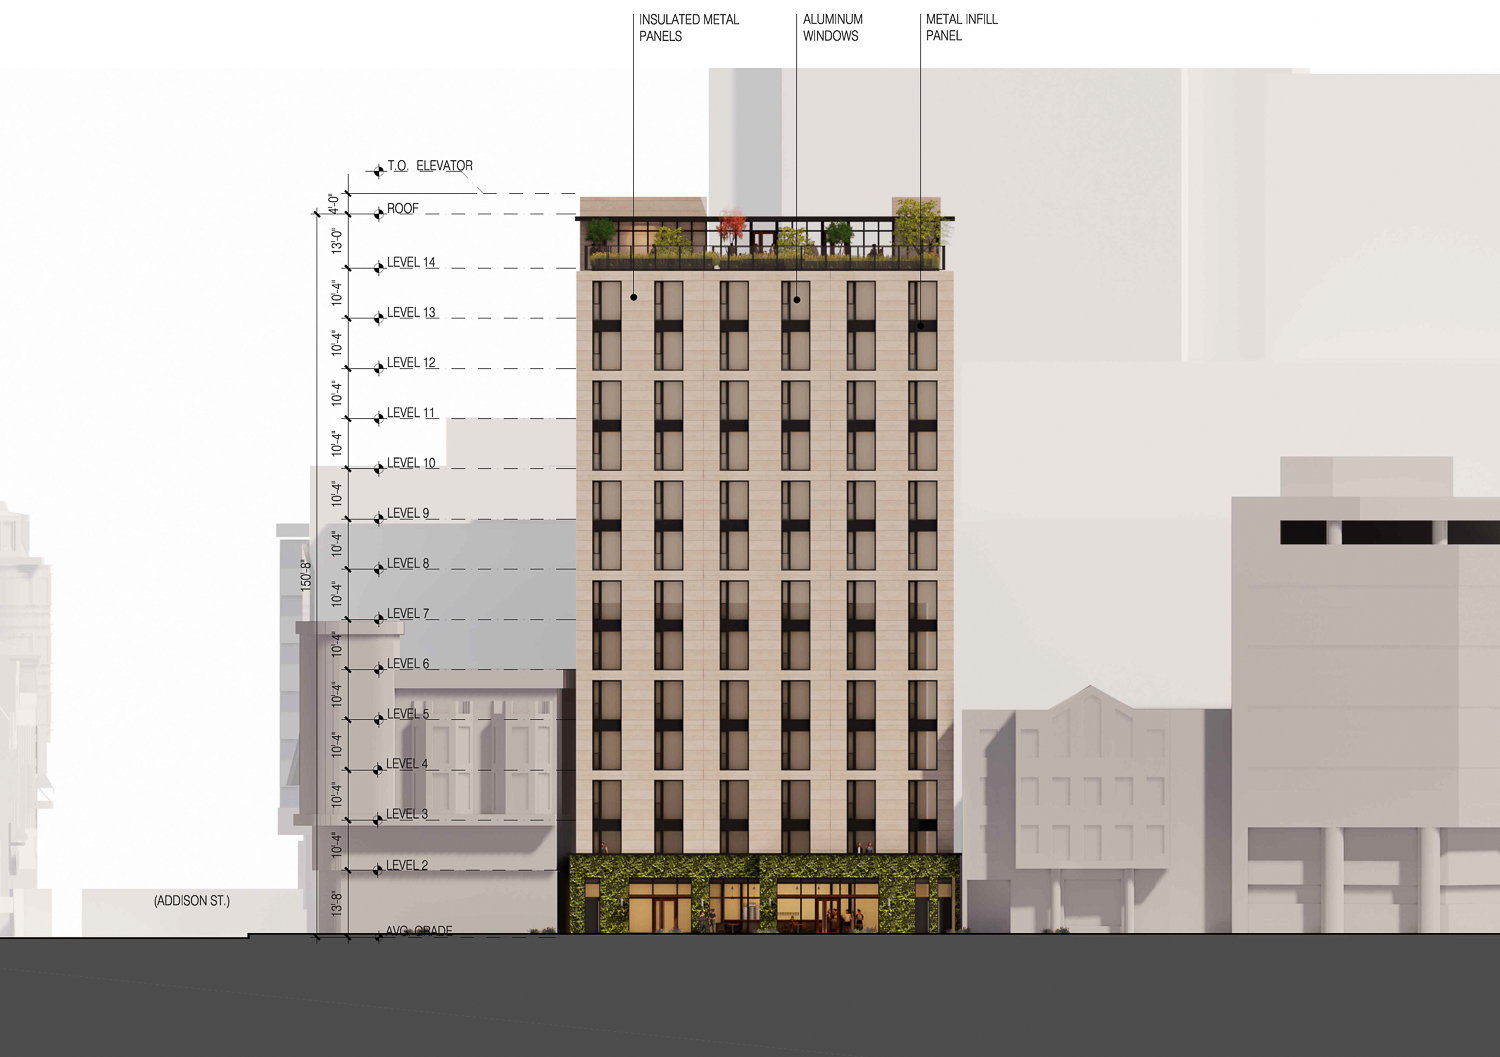 2109 Milvia Street west facade elevation, rendering by Trachtenberg Architects